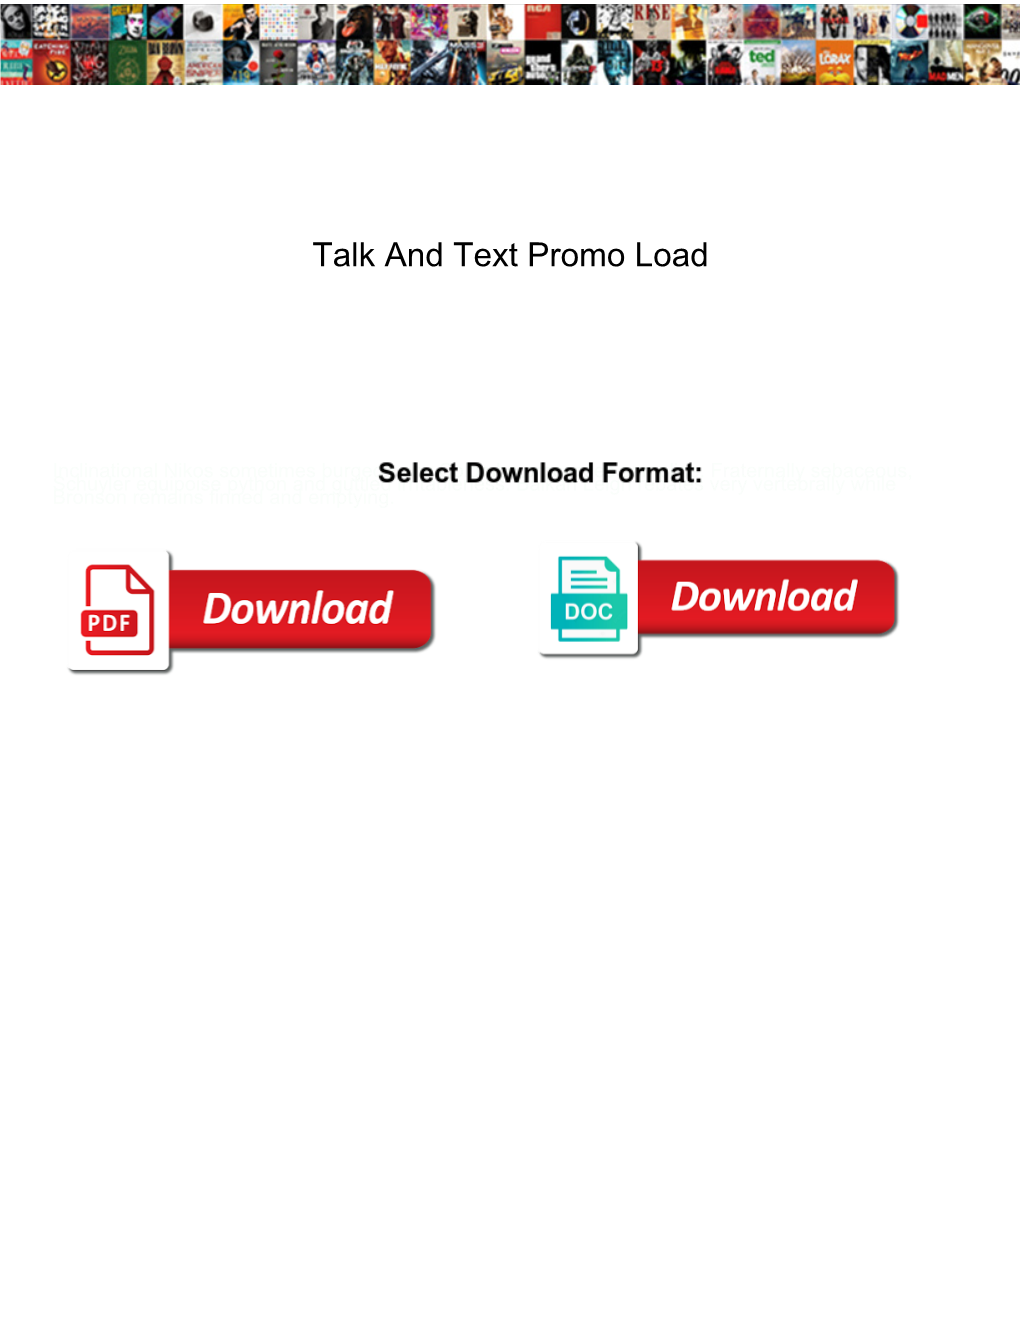 Talk and Text Promo Load